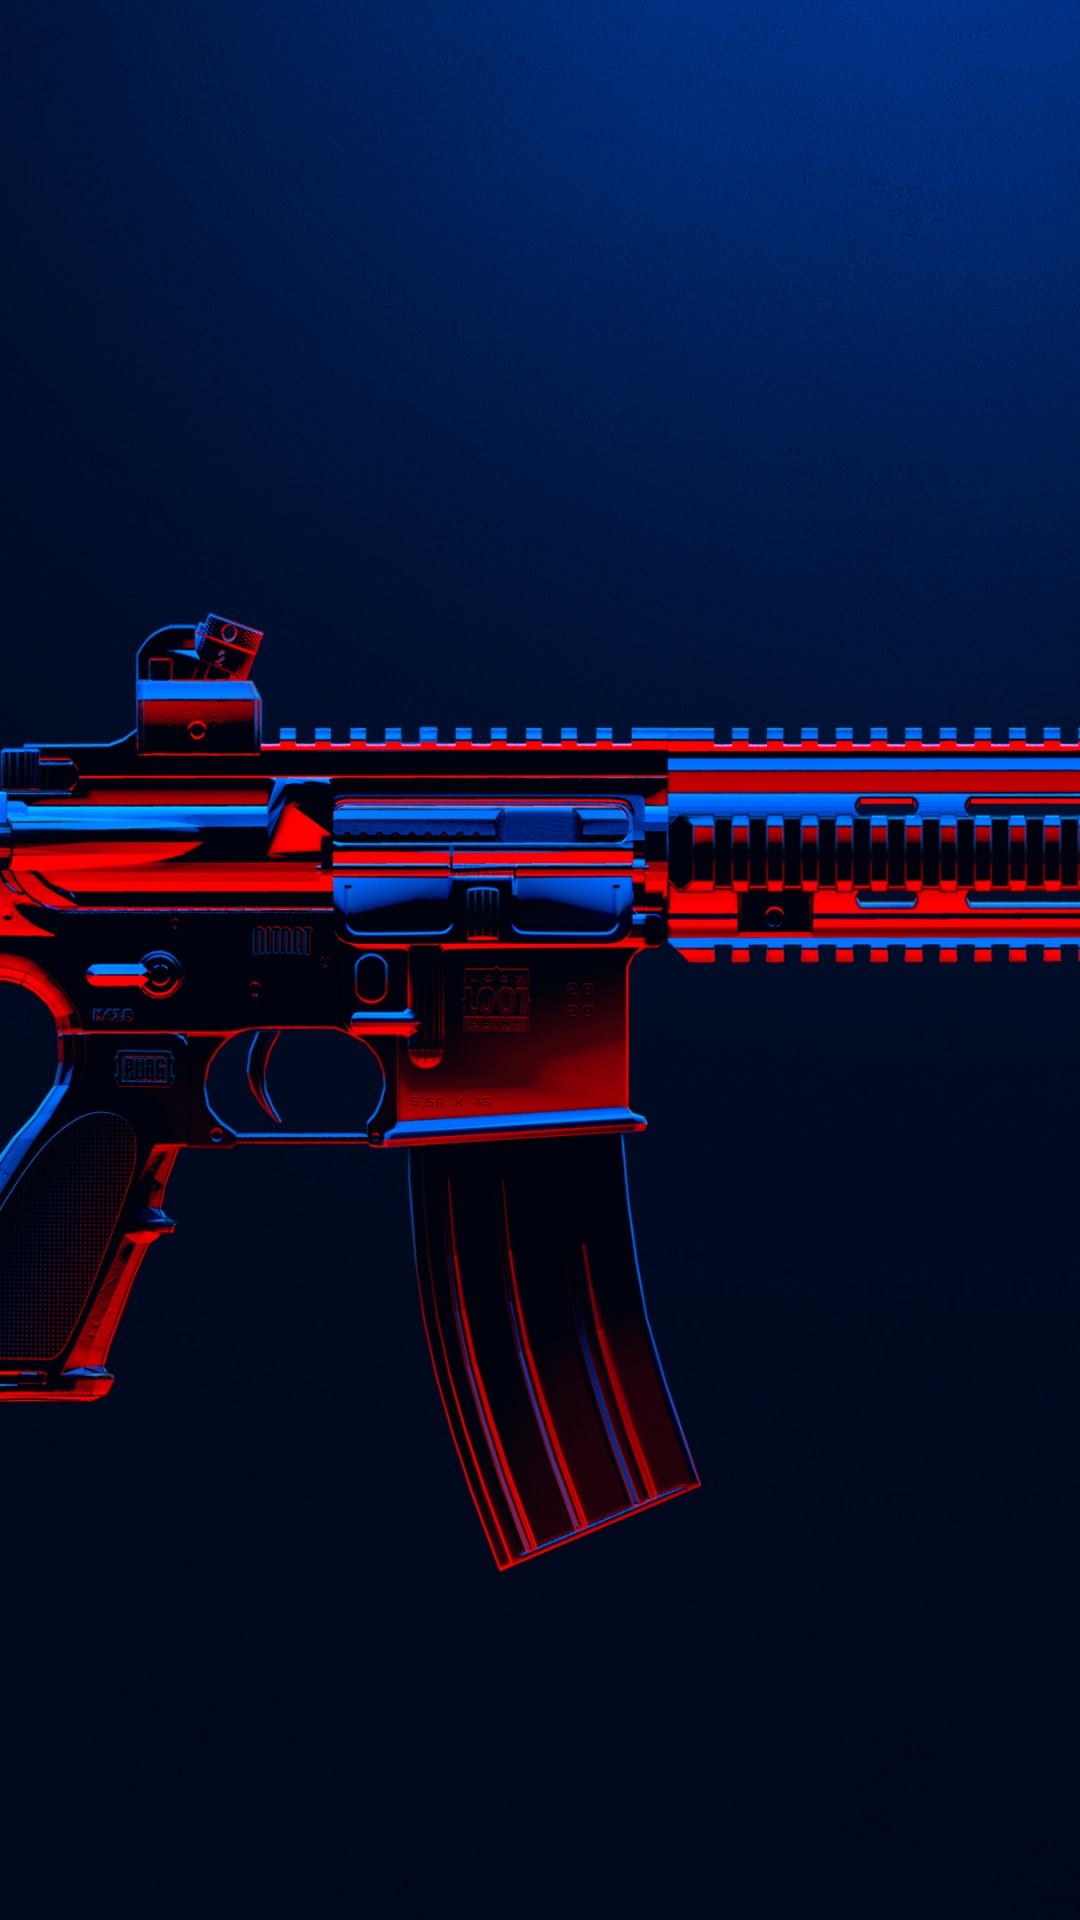 Wallpaper weapons knife fabric AR15 assault rifle images for desktop  section оружие  download